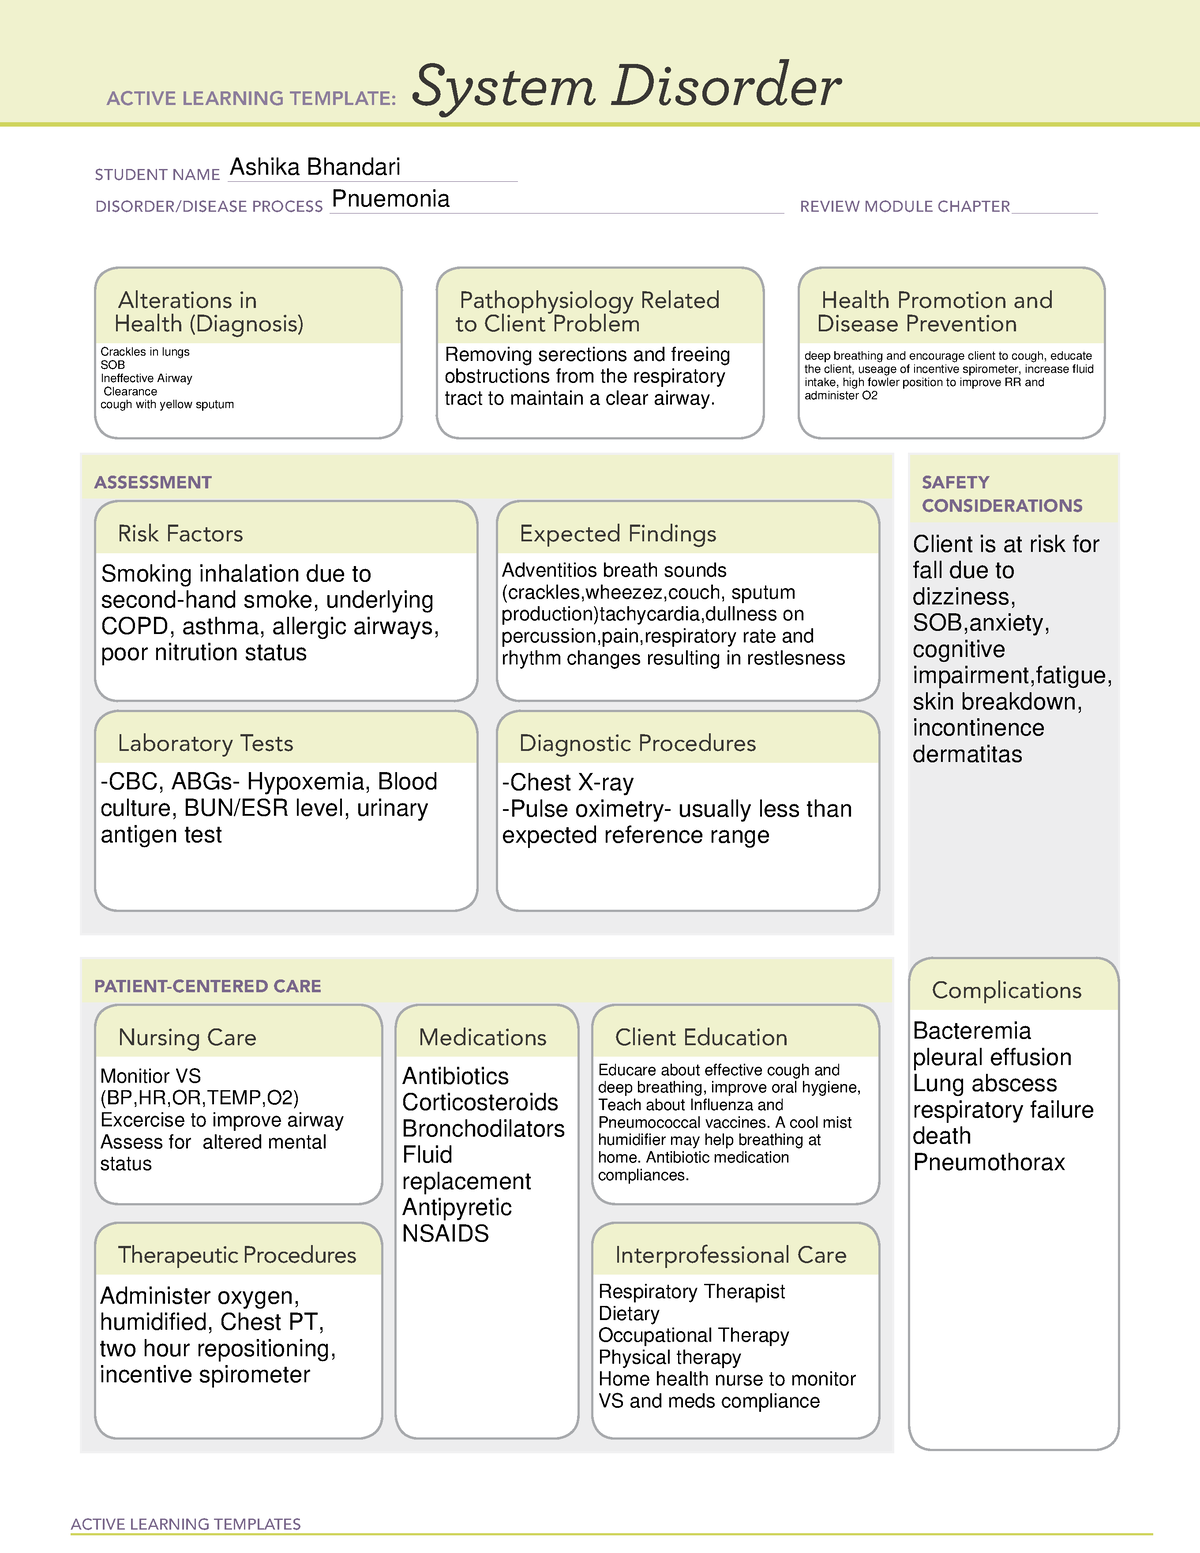 System Disorder assignment - ACTIVE LEARNING TEMPLATES System Disorder ...